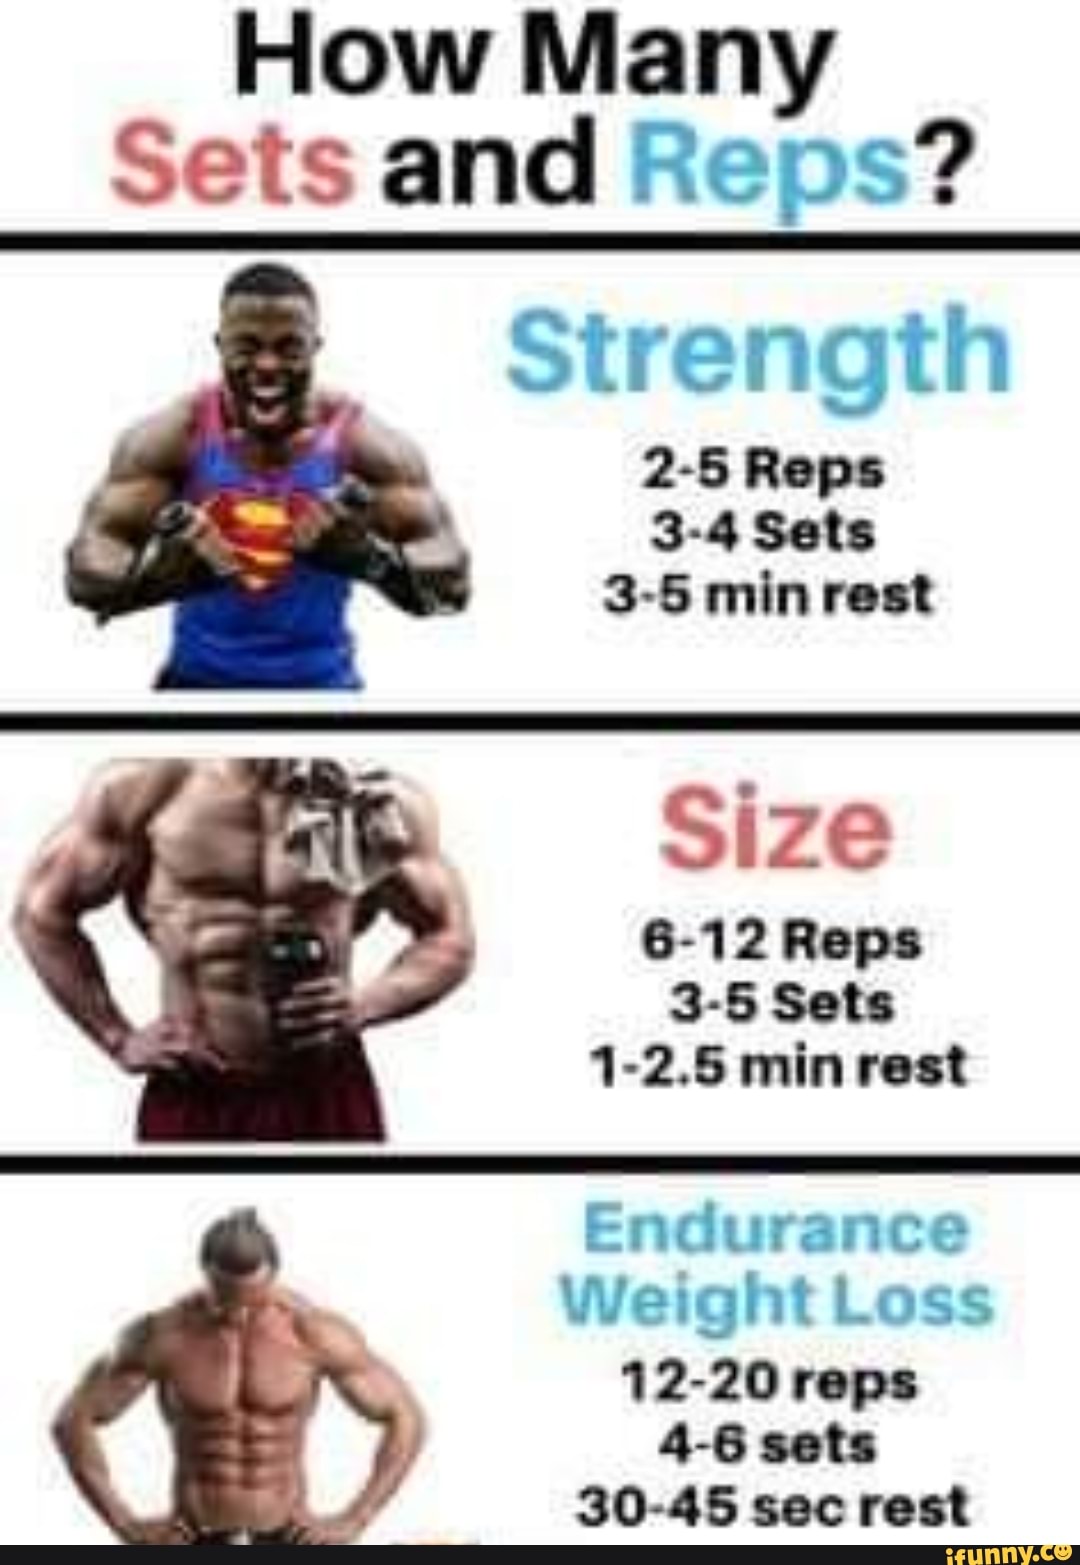 How Many Sets and Reps? Strength ME 2-5 Reps 3-4 Sets 3-5 min rest Size 6-12 Reps 3-5 Sets 1-2.5 min Endurance Weight Loss reps 4-6 sets 30-45 sec rest -